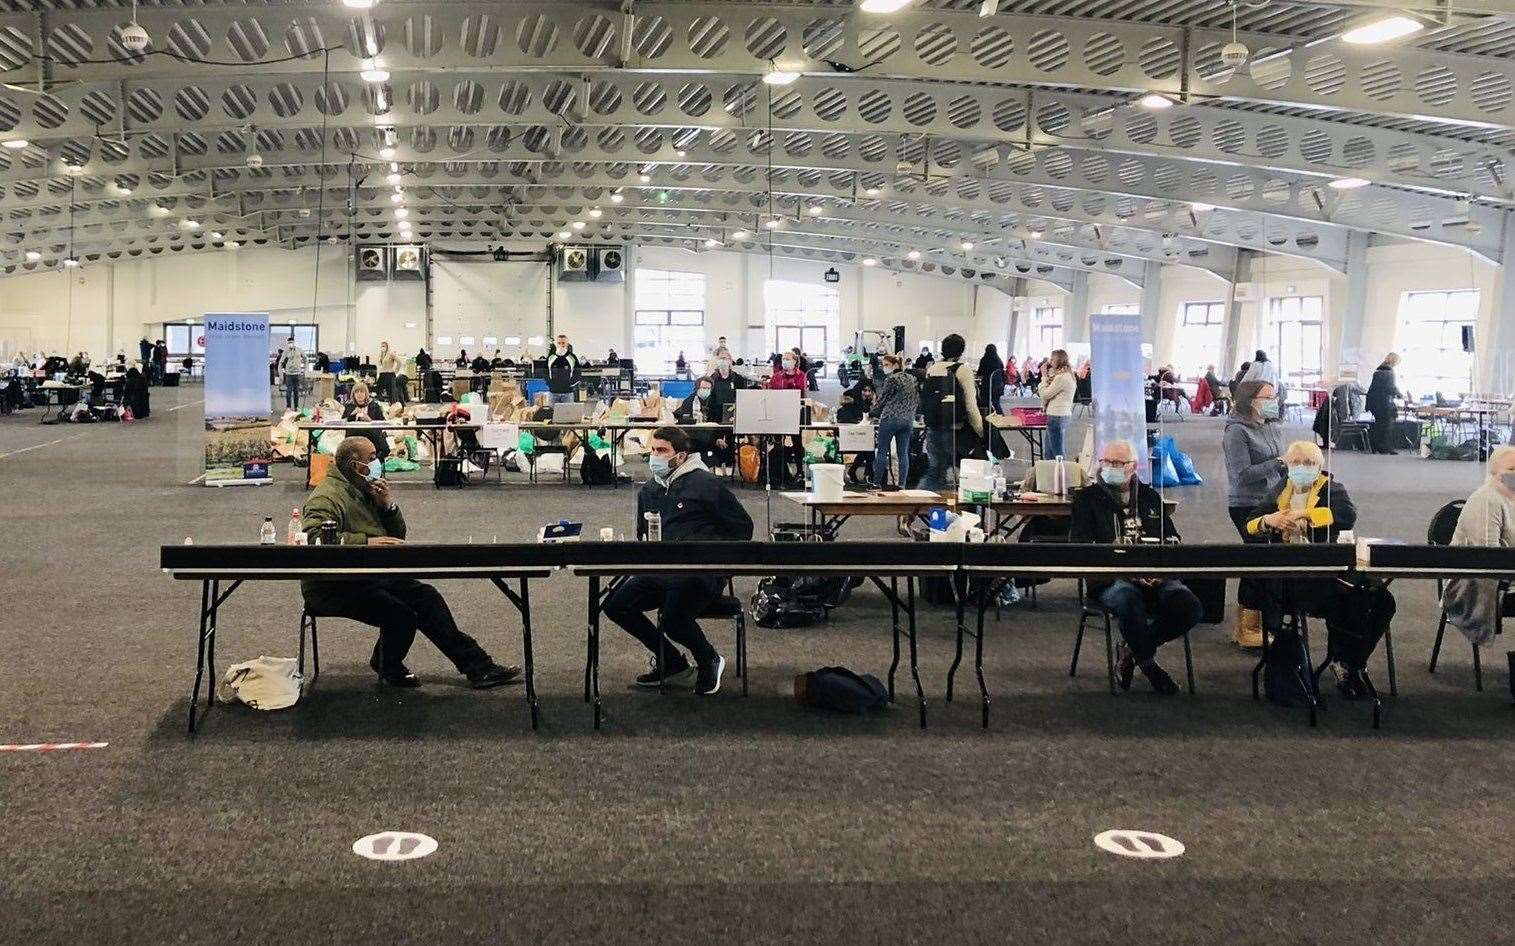 The count underway in Maidstone Picture: Maidstone Borough Council